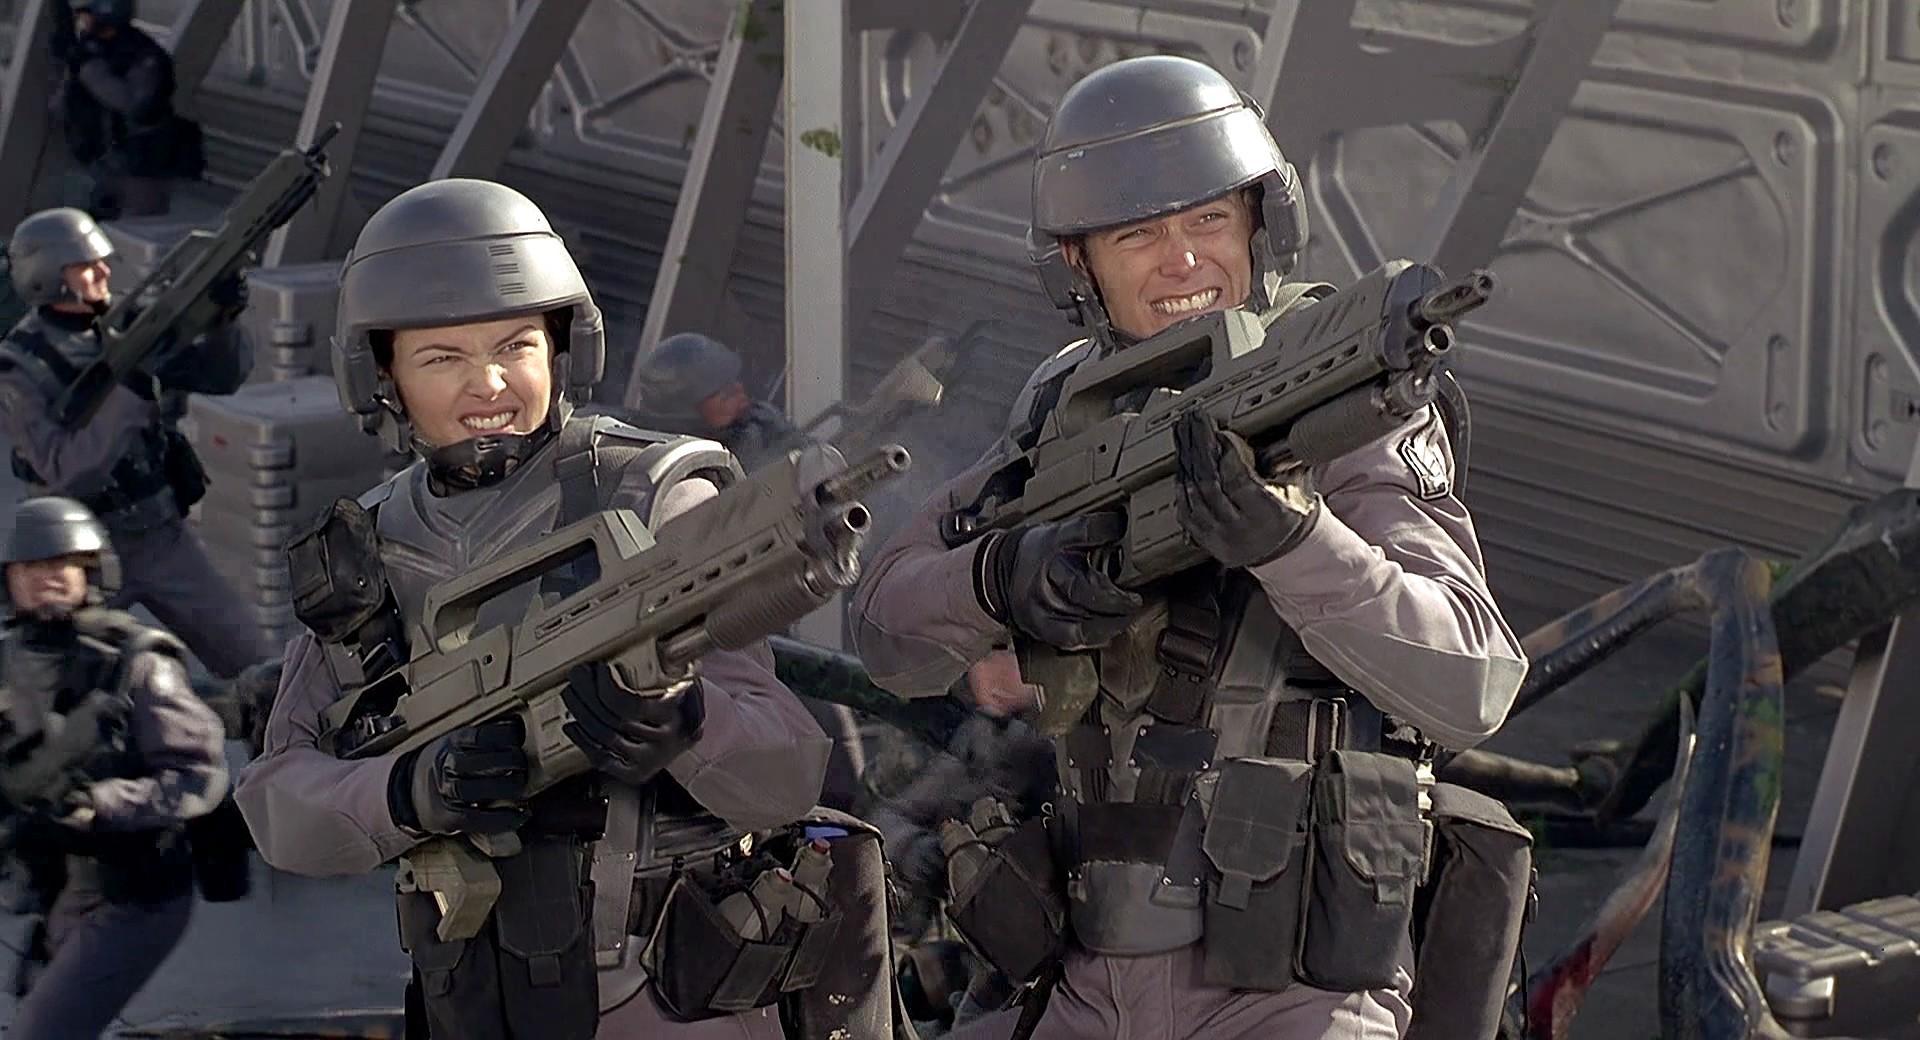 Image Gallery For Starship Troopers FilmAffinity